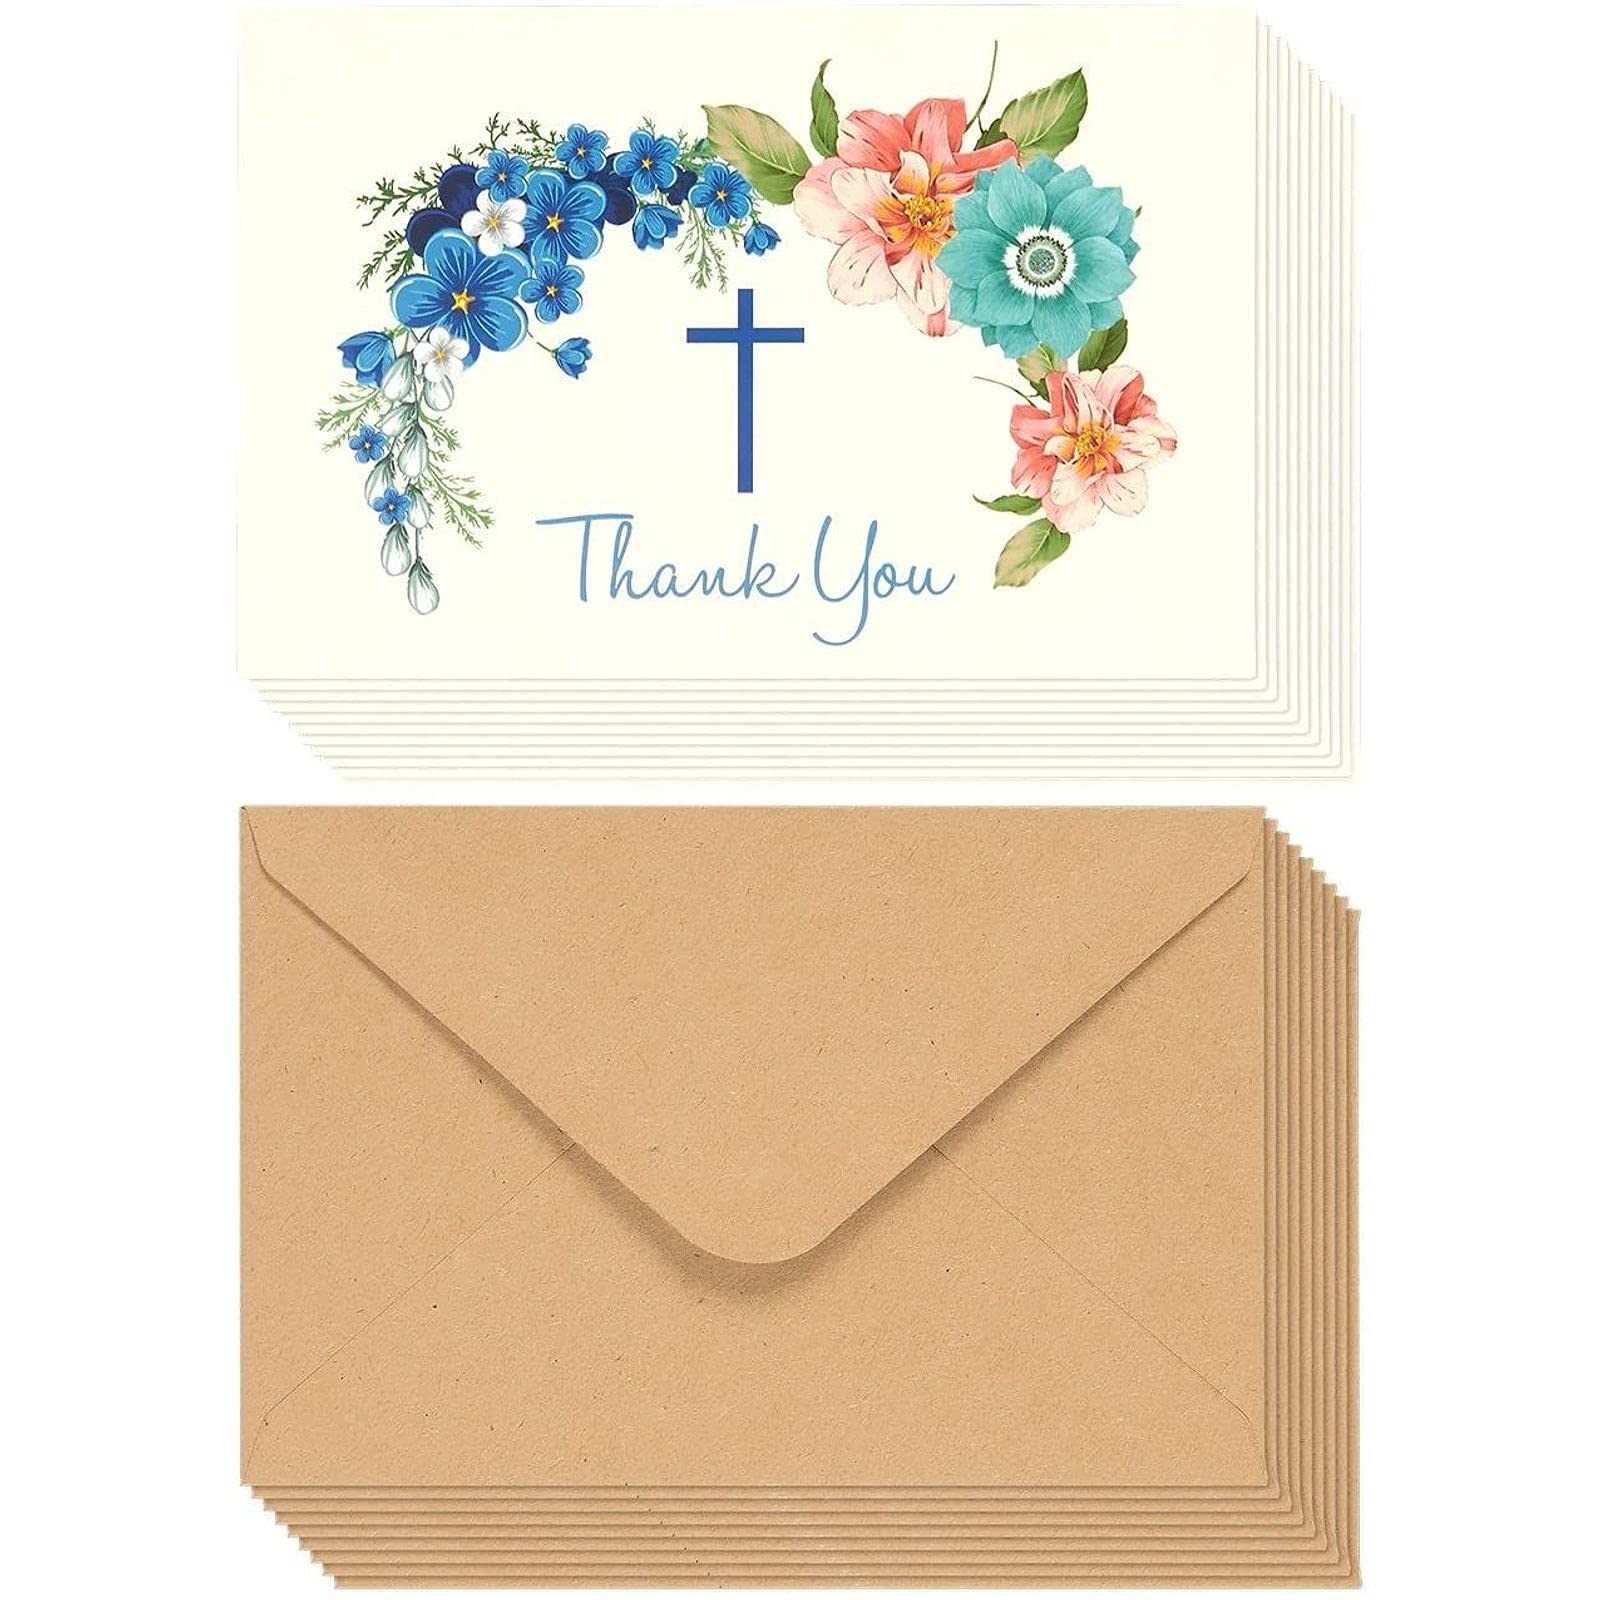 48 Pack Christian Thank You Cards With Envelopes, Bulk Baptism, Religious Greeting Notes for Christening, Wedding, Communion, Floral Cross Design (4 x 6 In)